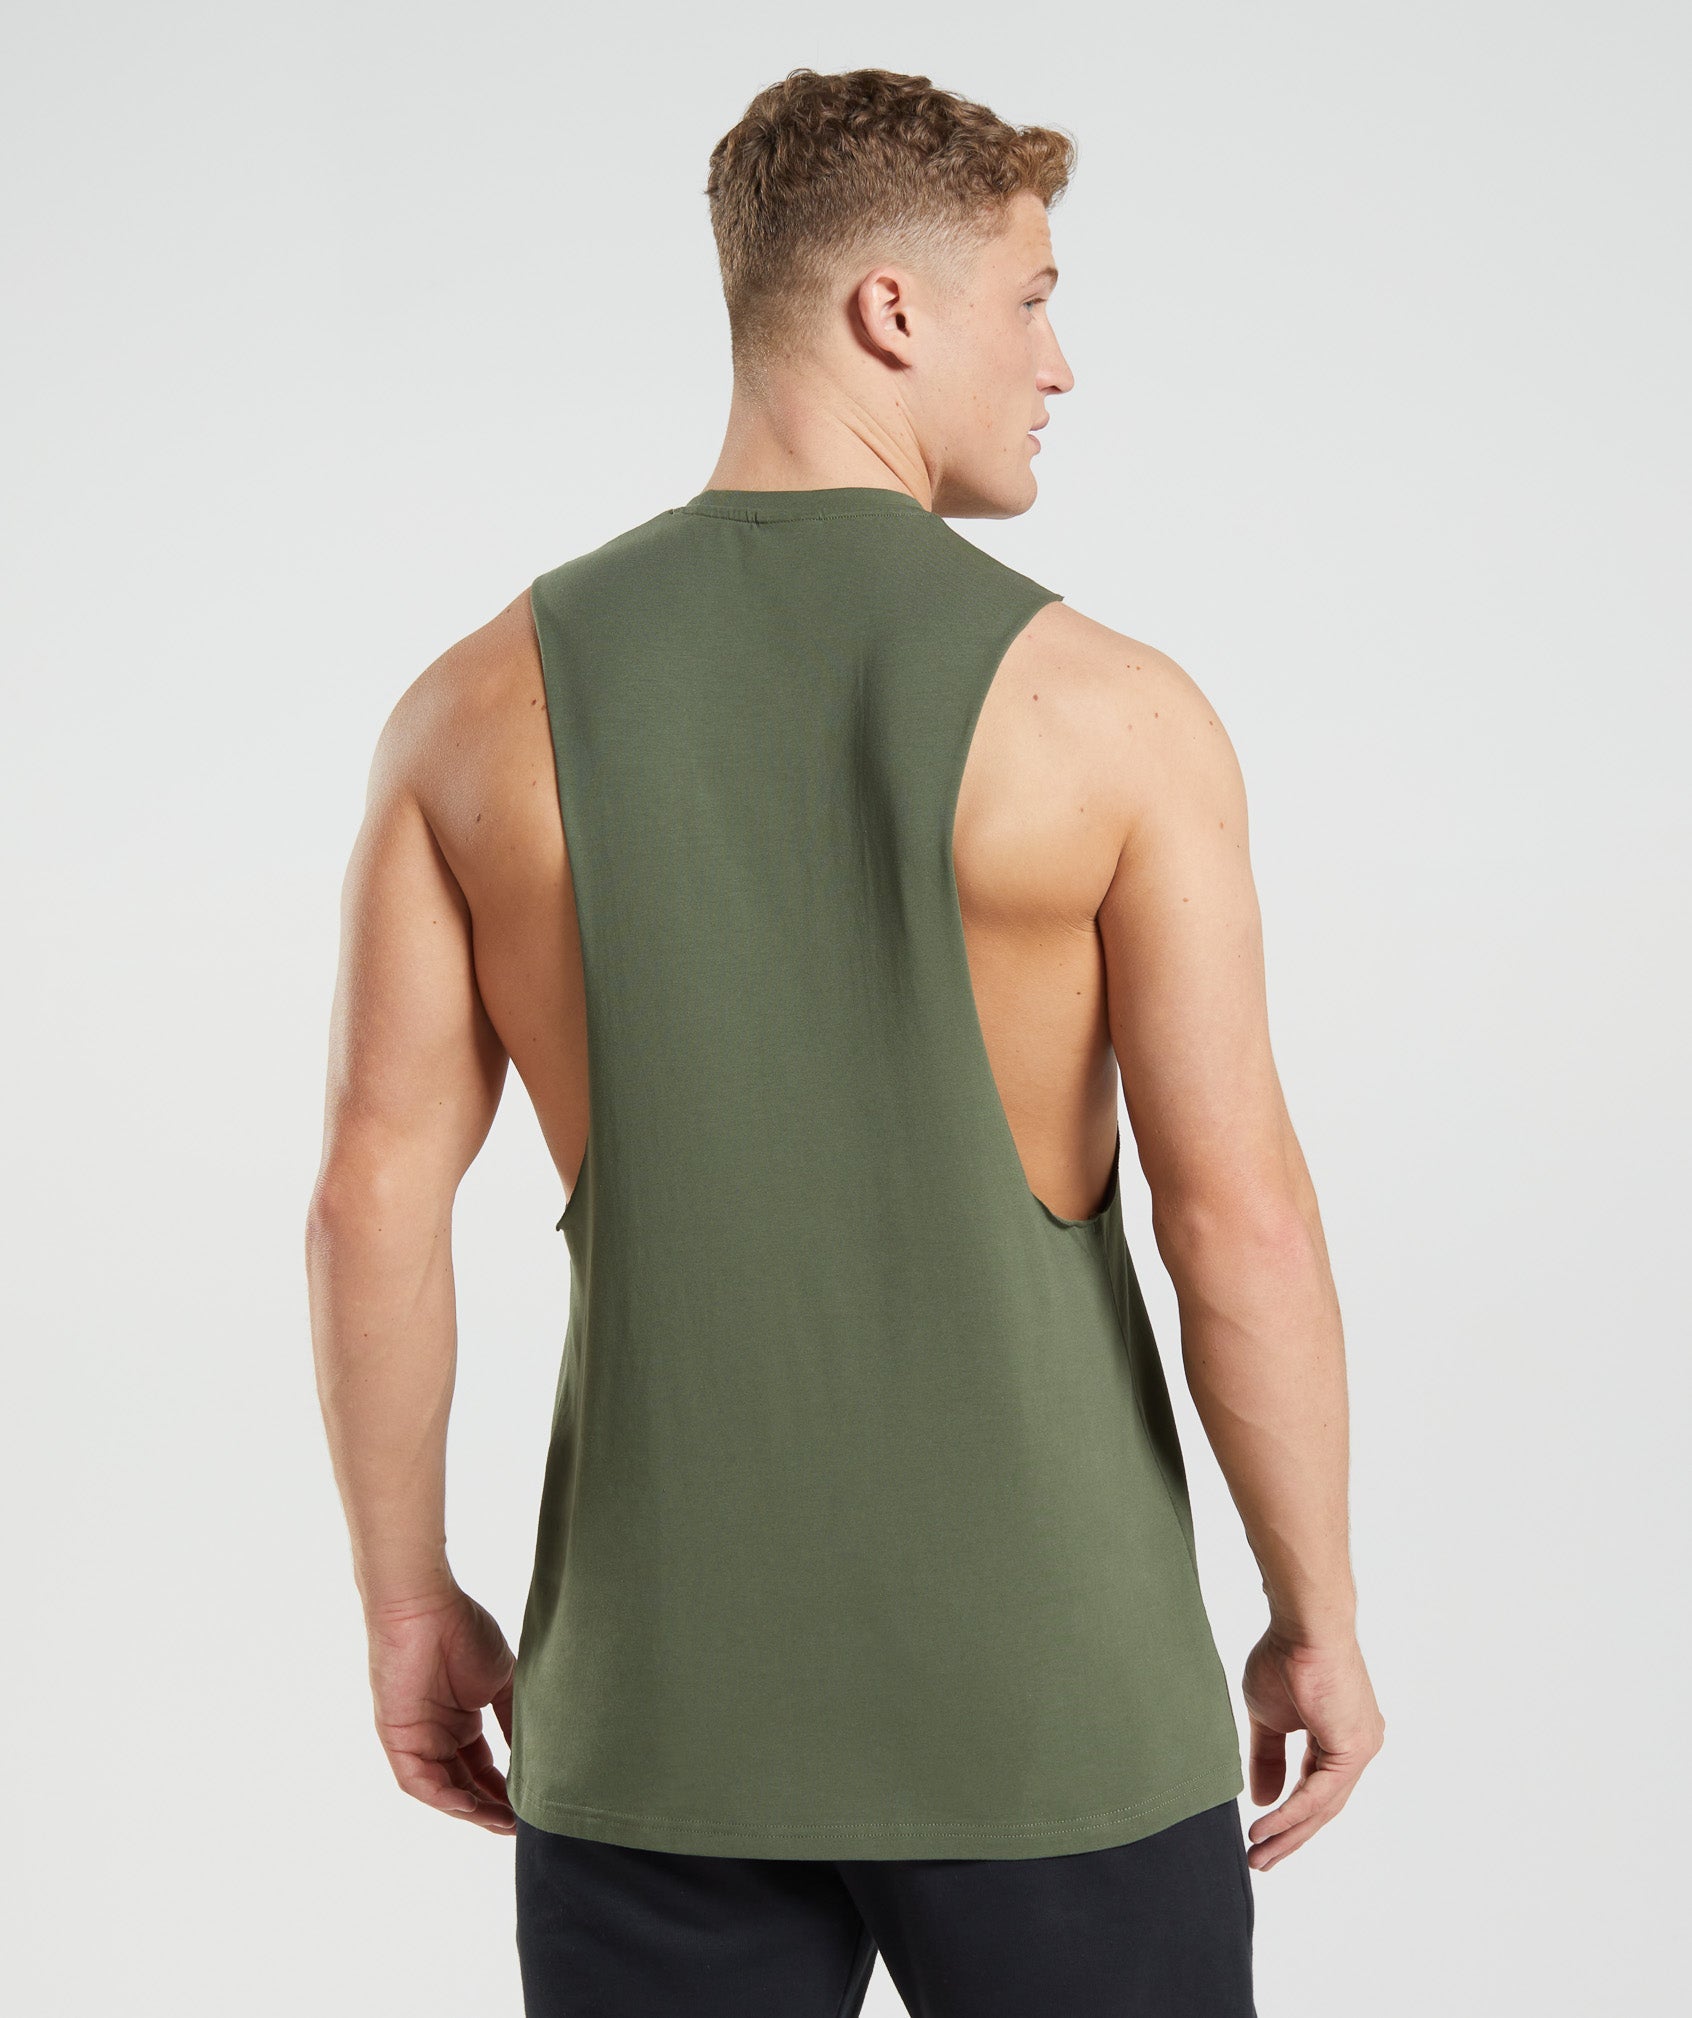 Leg Day Drop Arm Tank in Core Olive - view 2